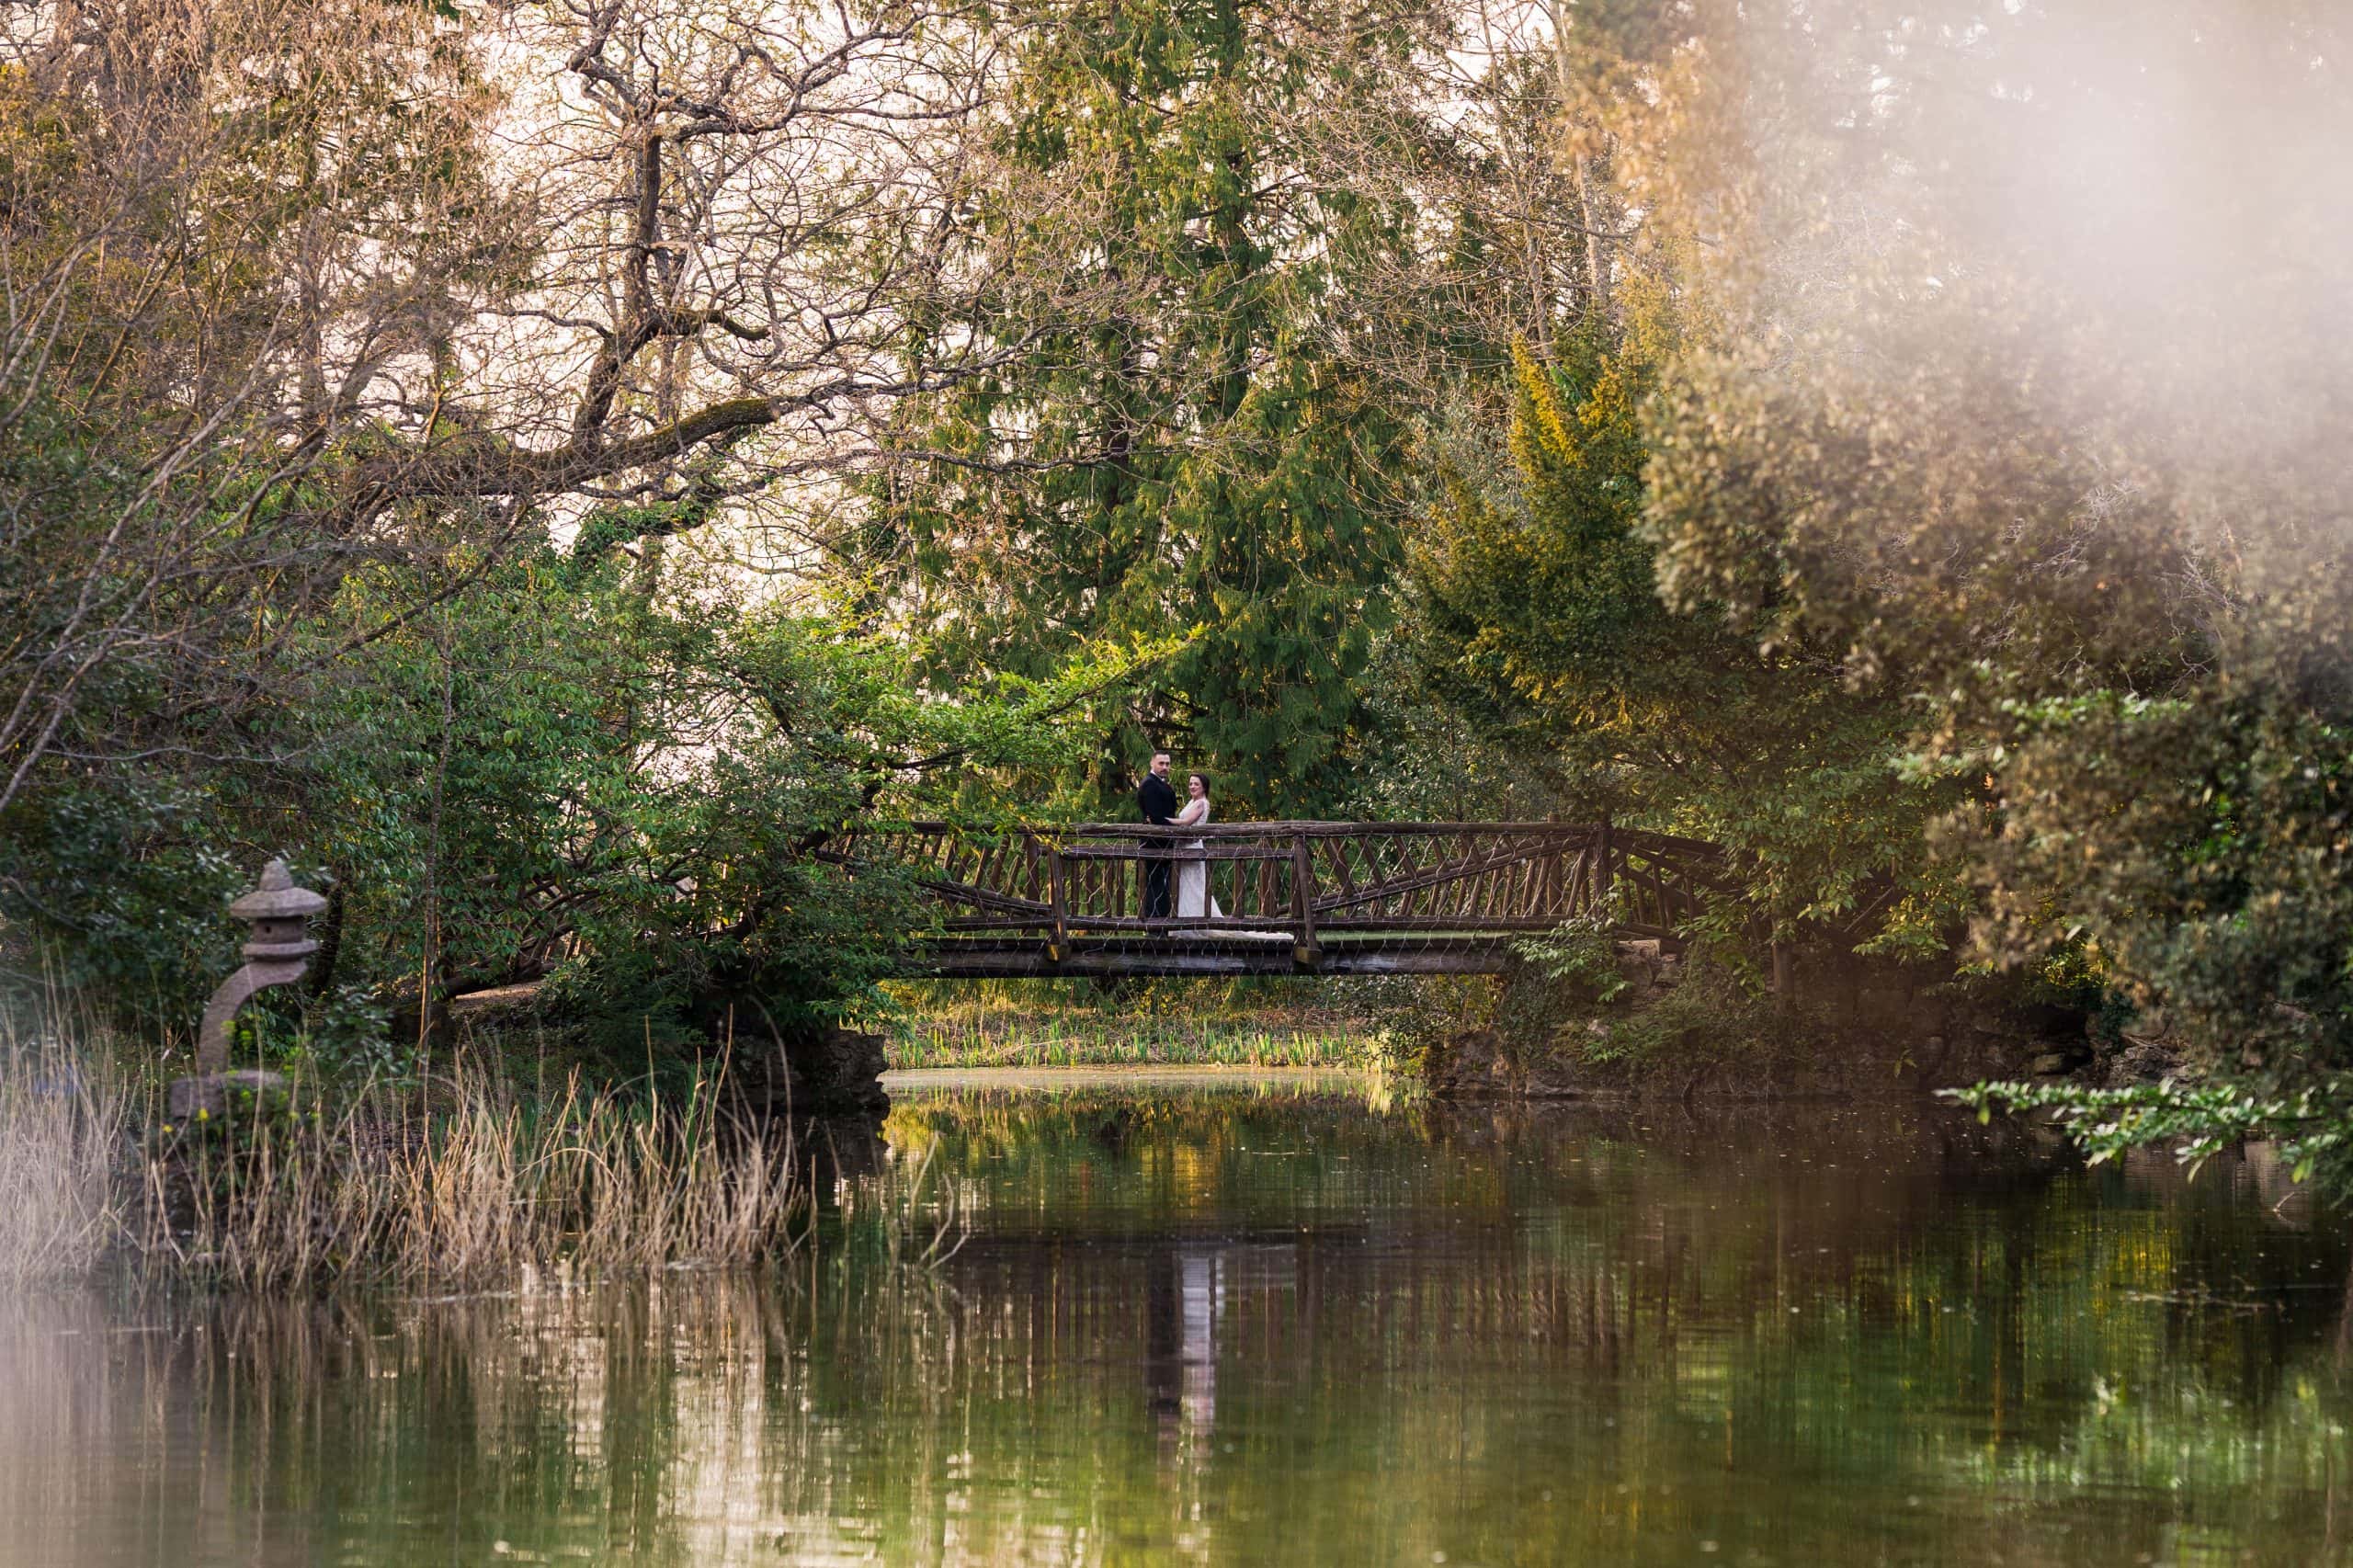 Newlyweds pose on a bridge over looking the water on the grounds of the stunning wedding venue Manor by the lake in Cheltenham, which is one of the top 15 wedding venues in The Cotswolds